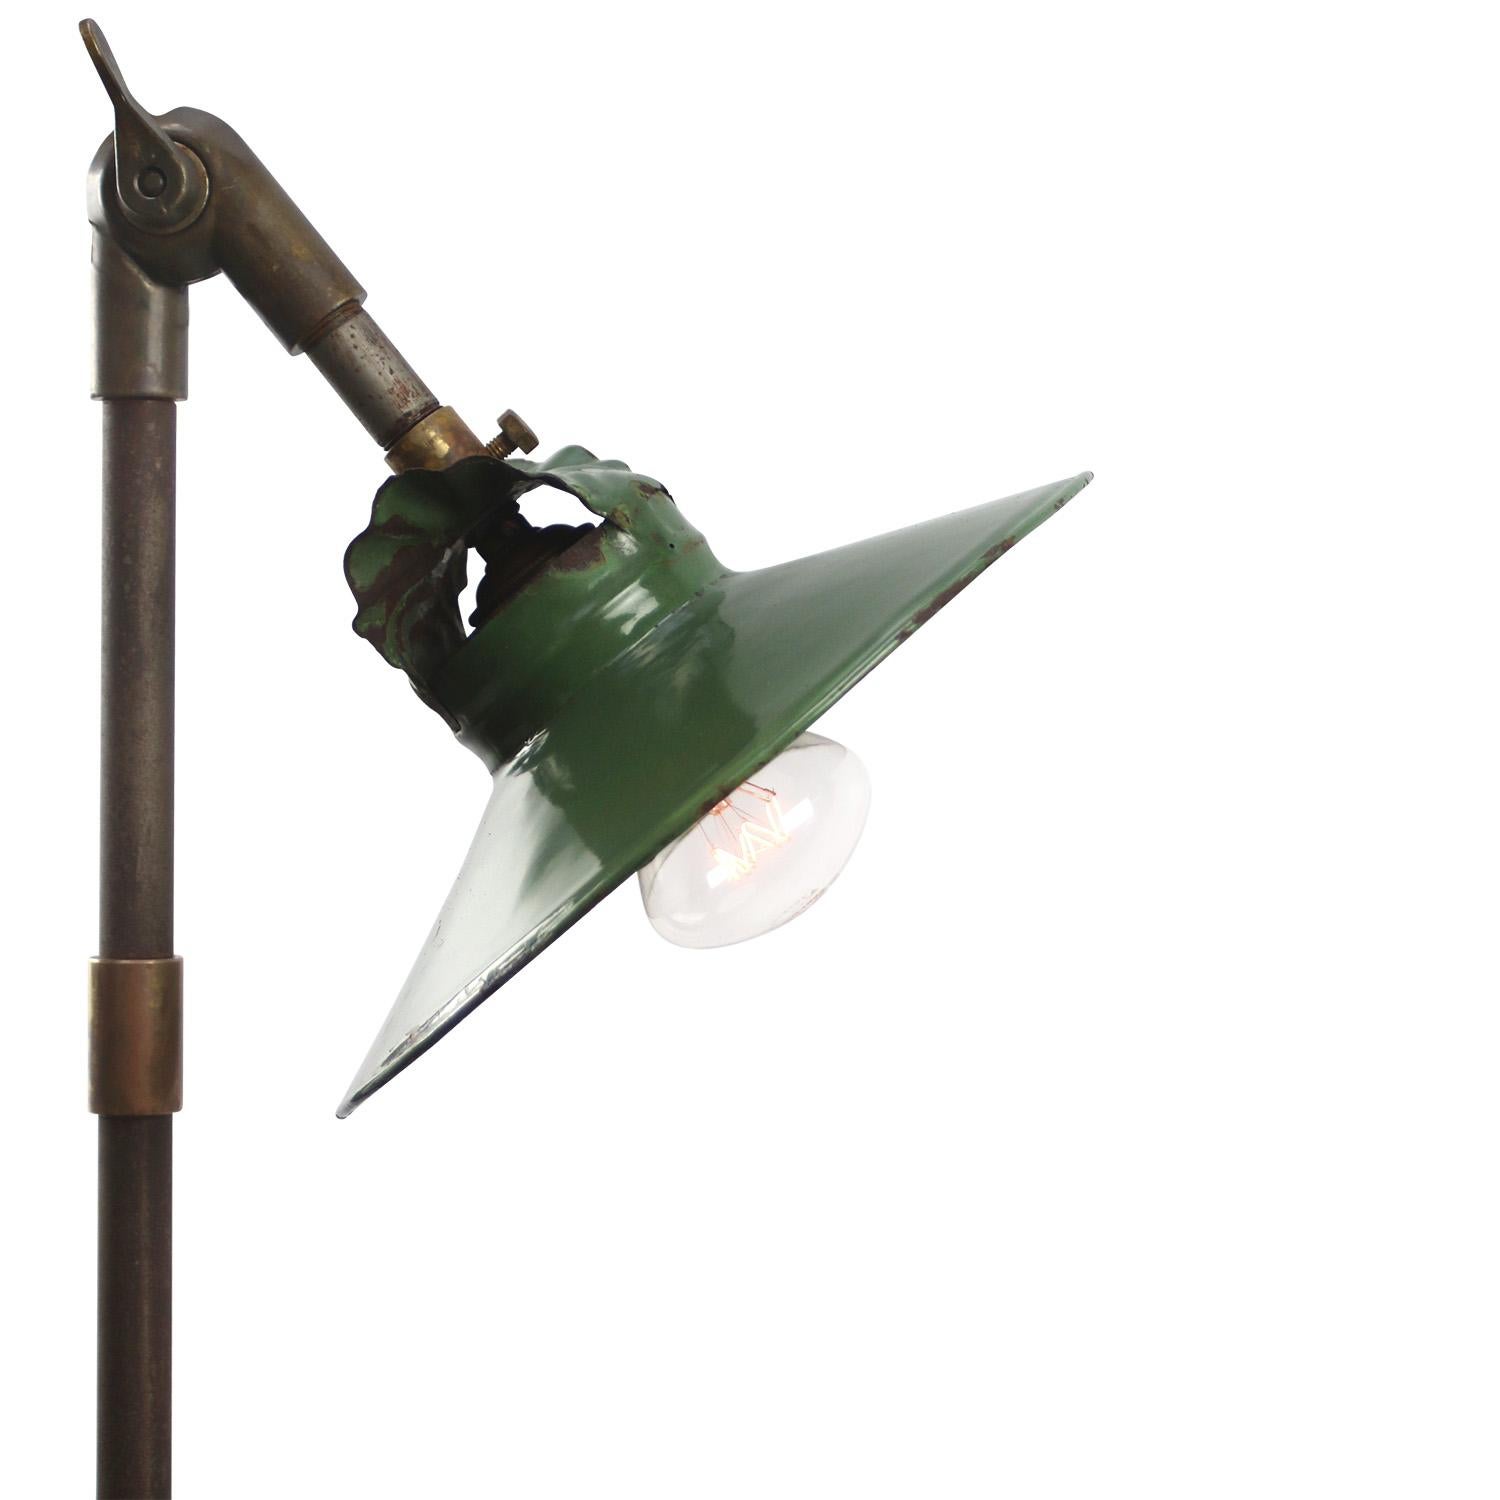 1930s Green enamel, cast iron industrial 3 arm machinist work light
adjustable in height 

Diameter Wall plate 10,5 cm / 4 inches

Priced per individual item. All lamps have been made suitable by international standards for incandescent light bulbs,